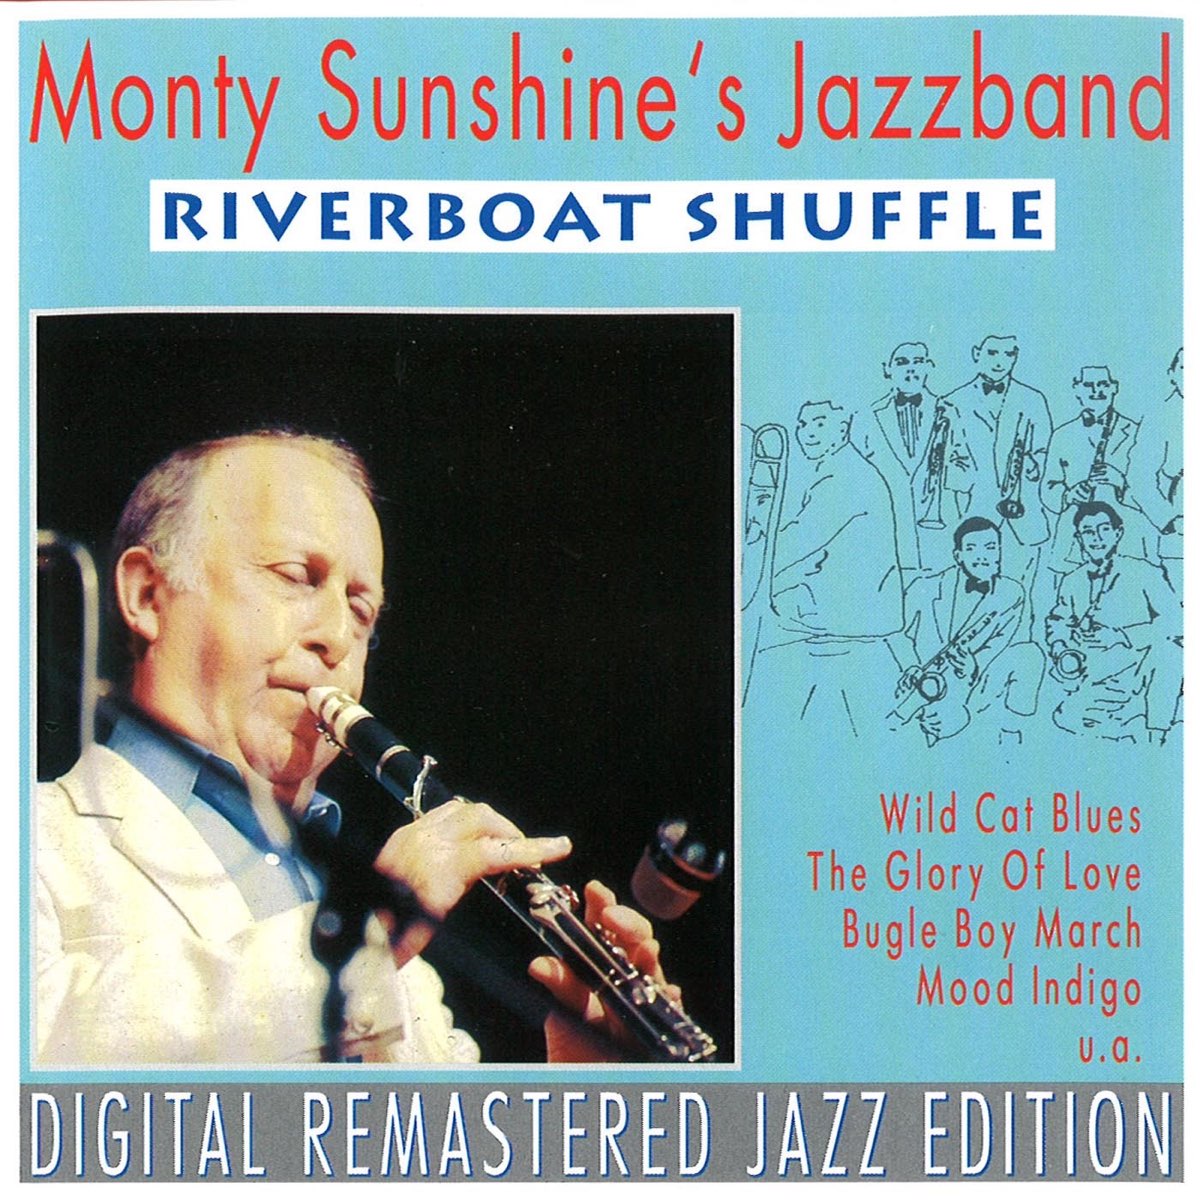 Riverboat Shuffle by Monty Sunshine's Jazz Band on Apple Music